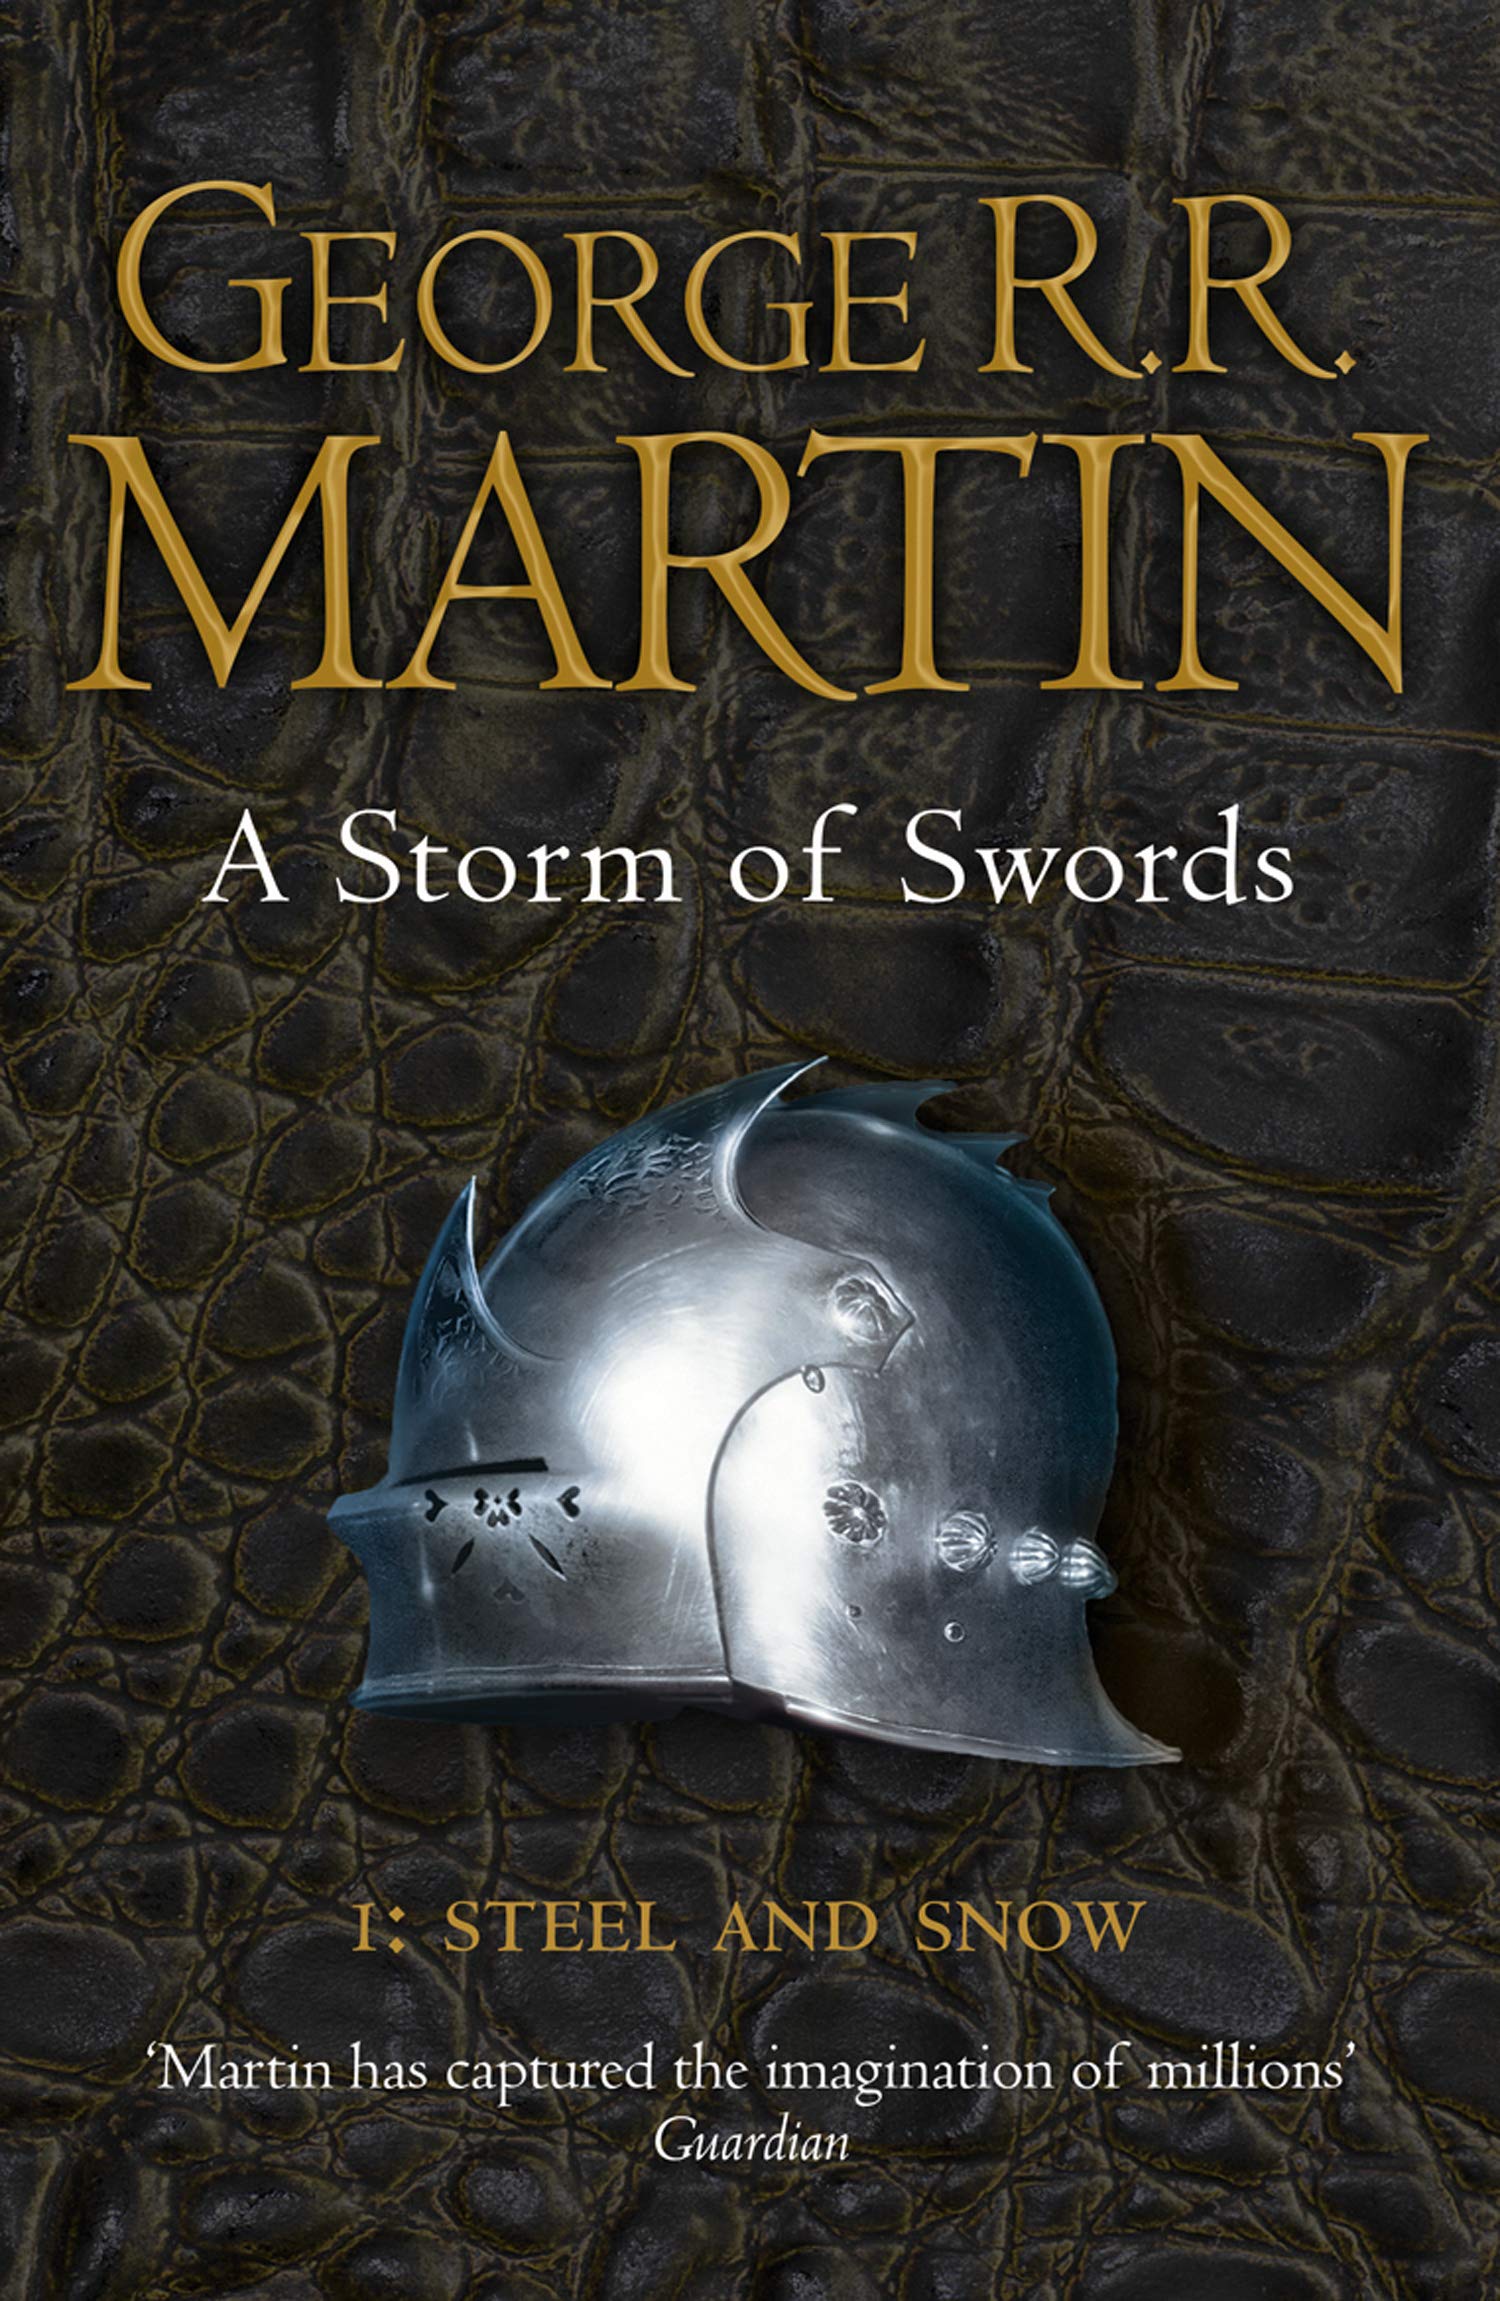 A Storm of Swords: Part 1 Steel and Snow (A Song of Ice and Fire Book 3)